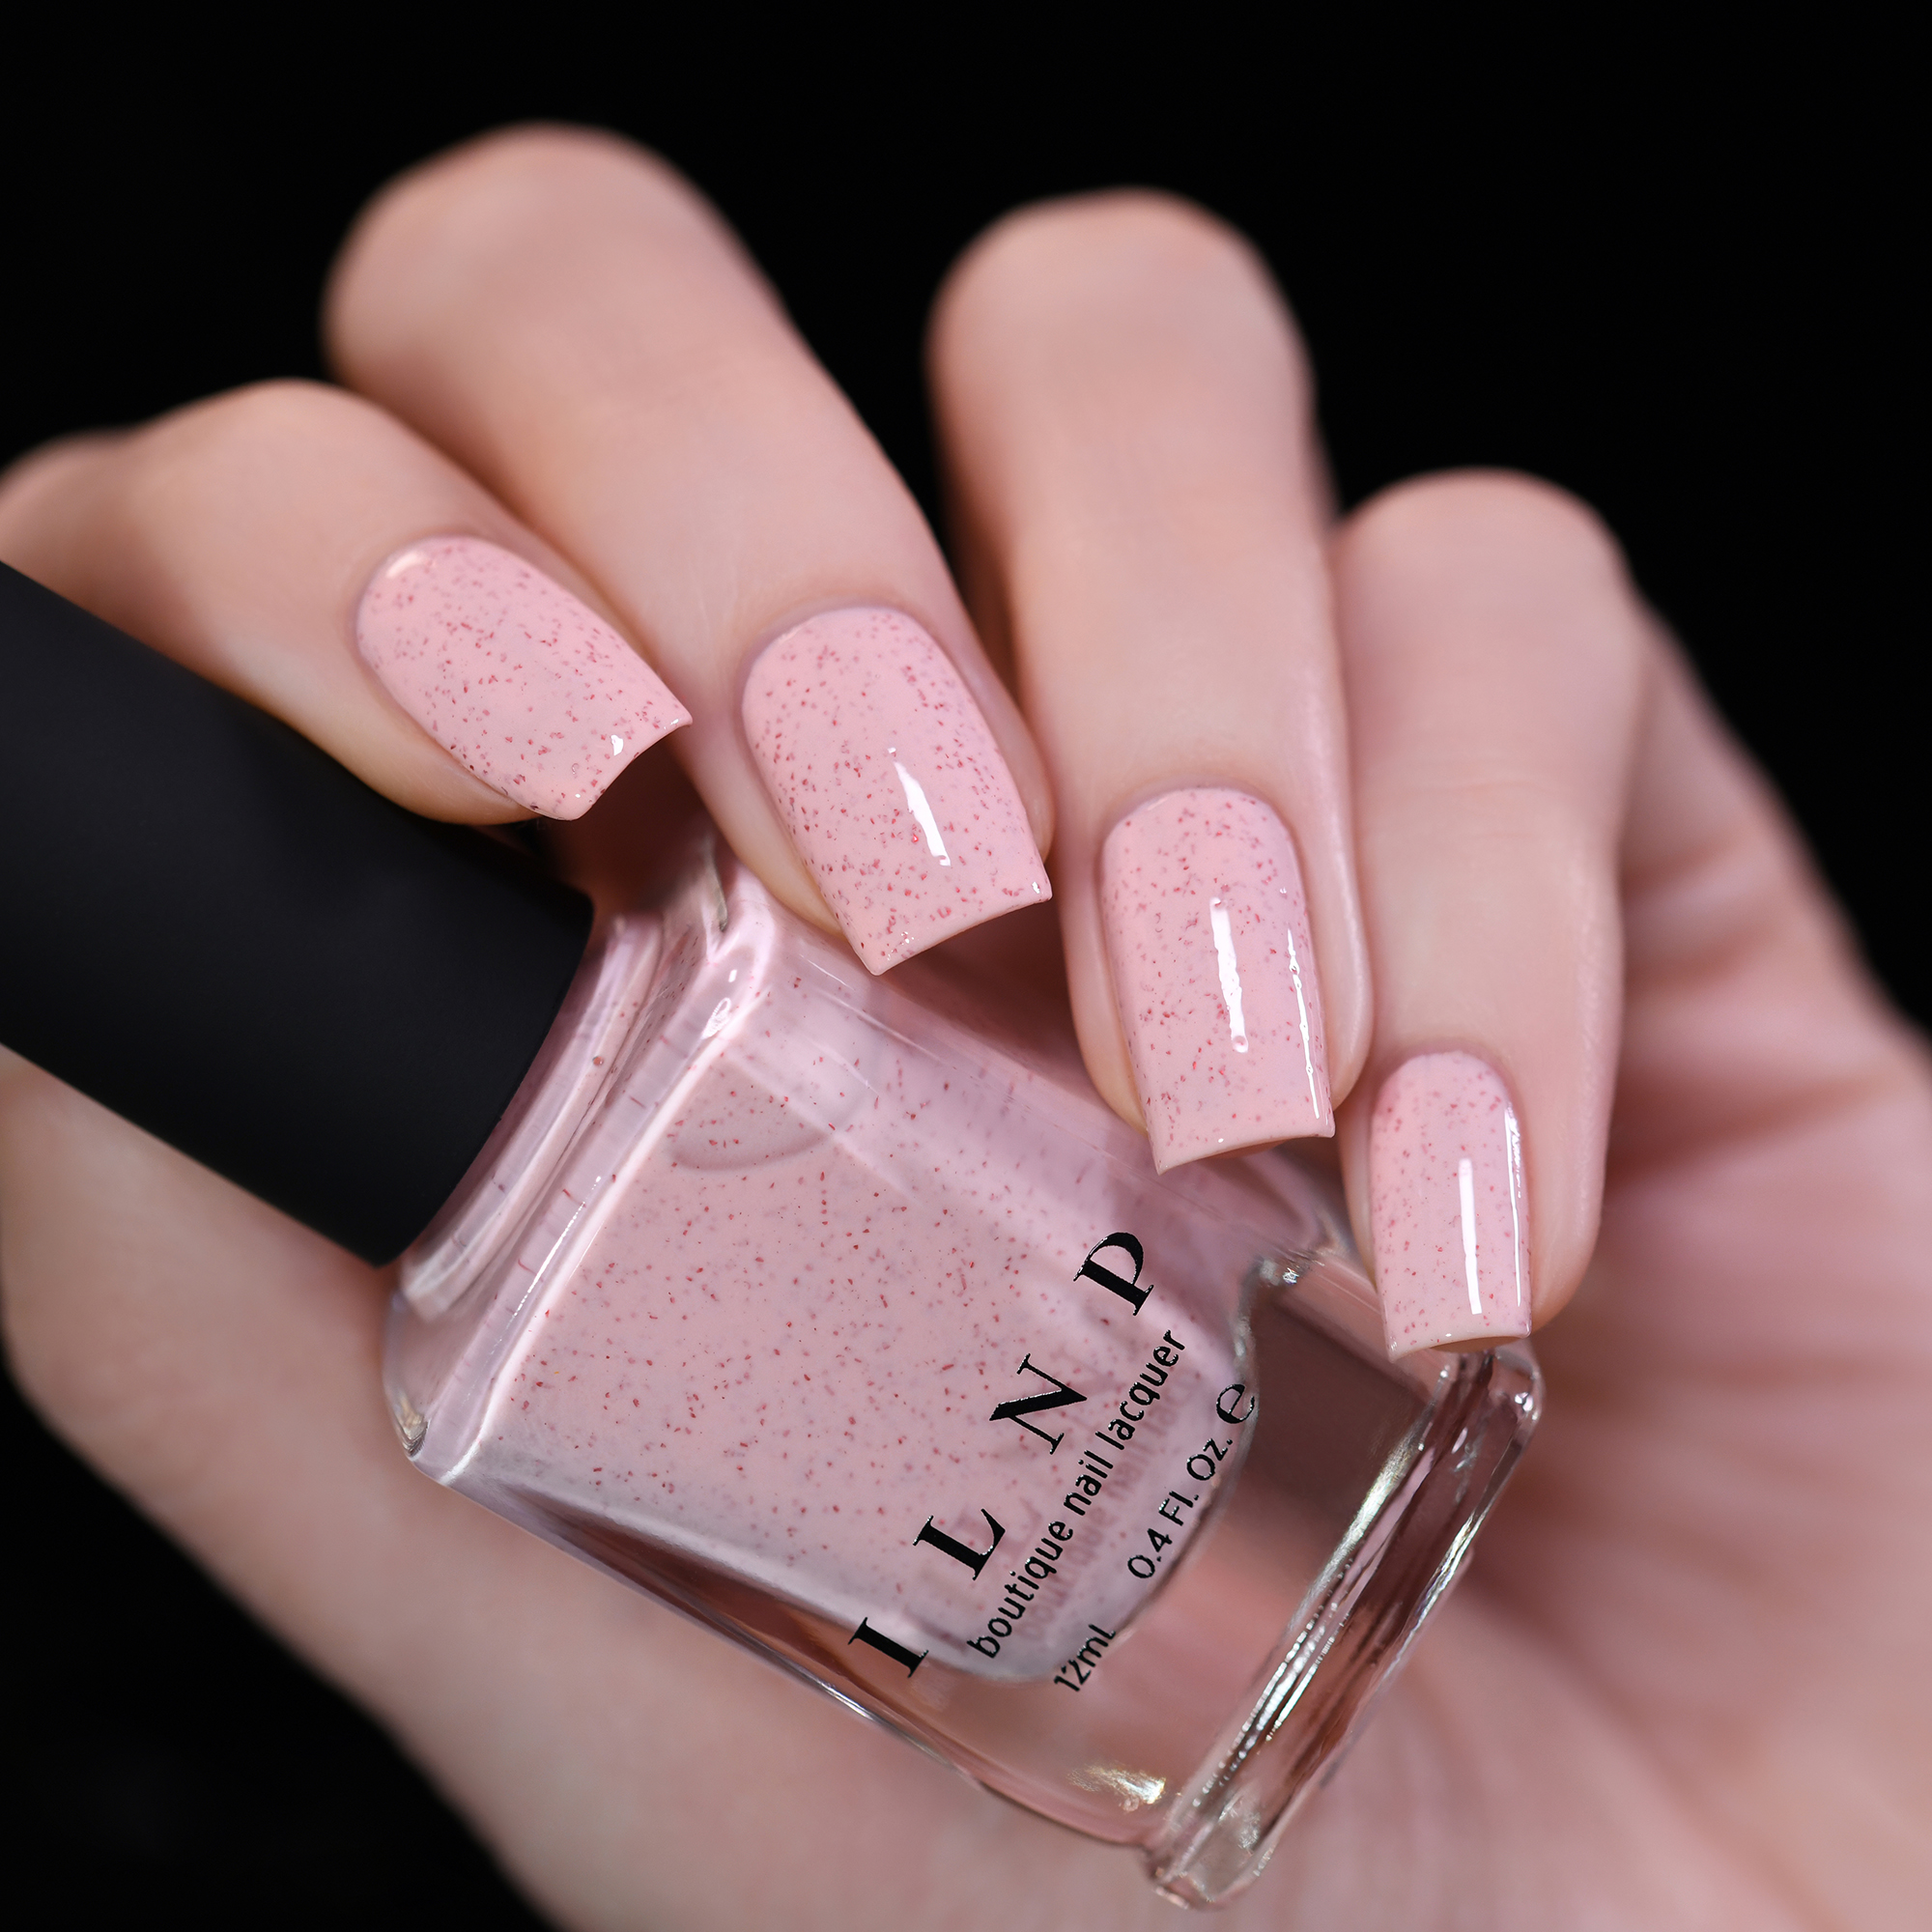 Sunday - Pastel Pink Speckled Nail Polish by ILNP